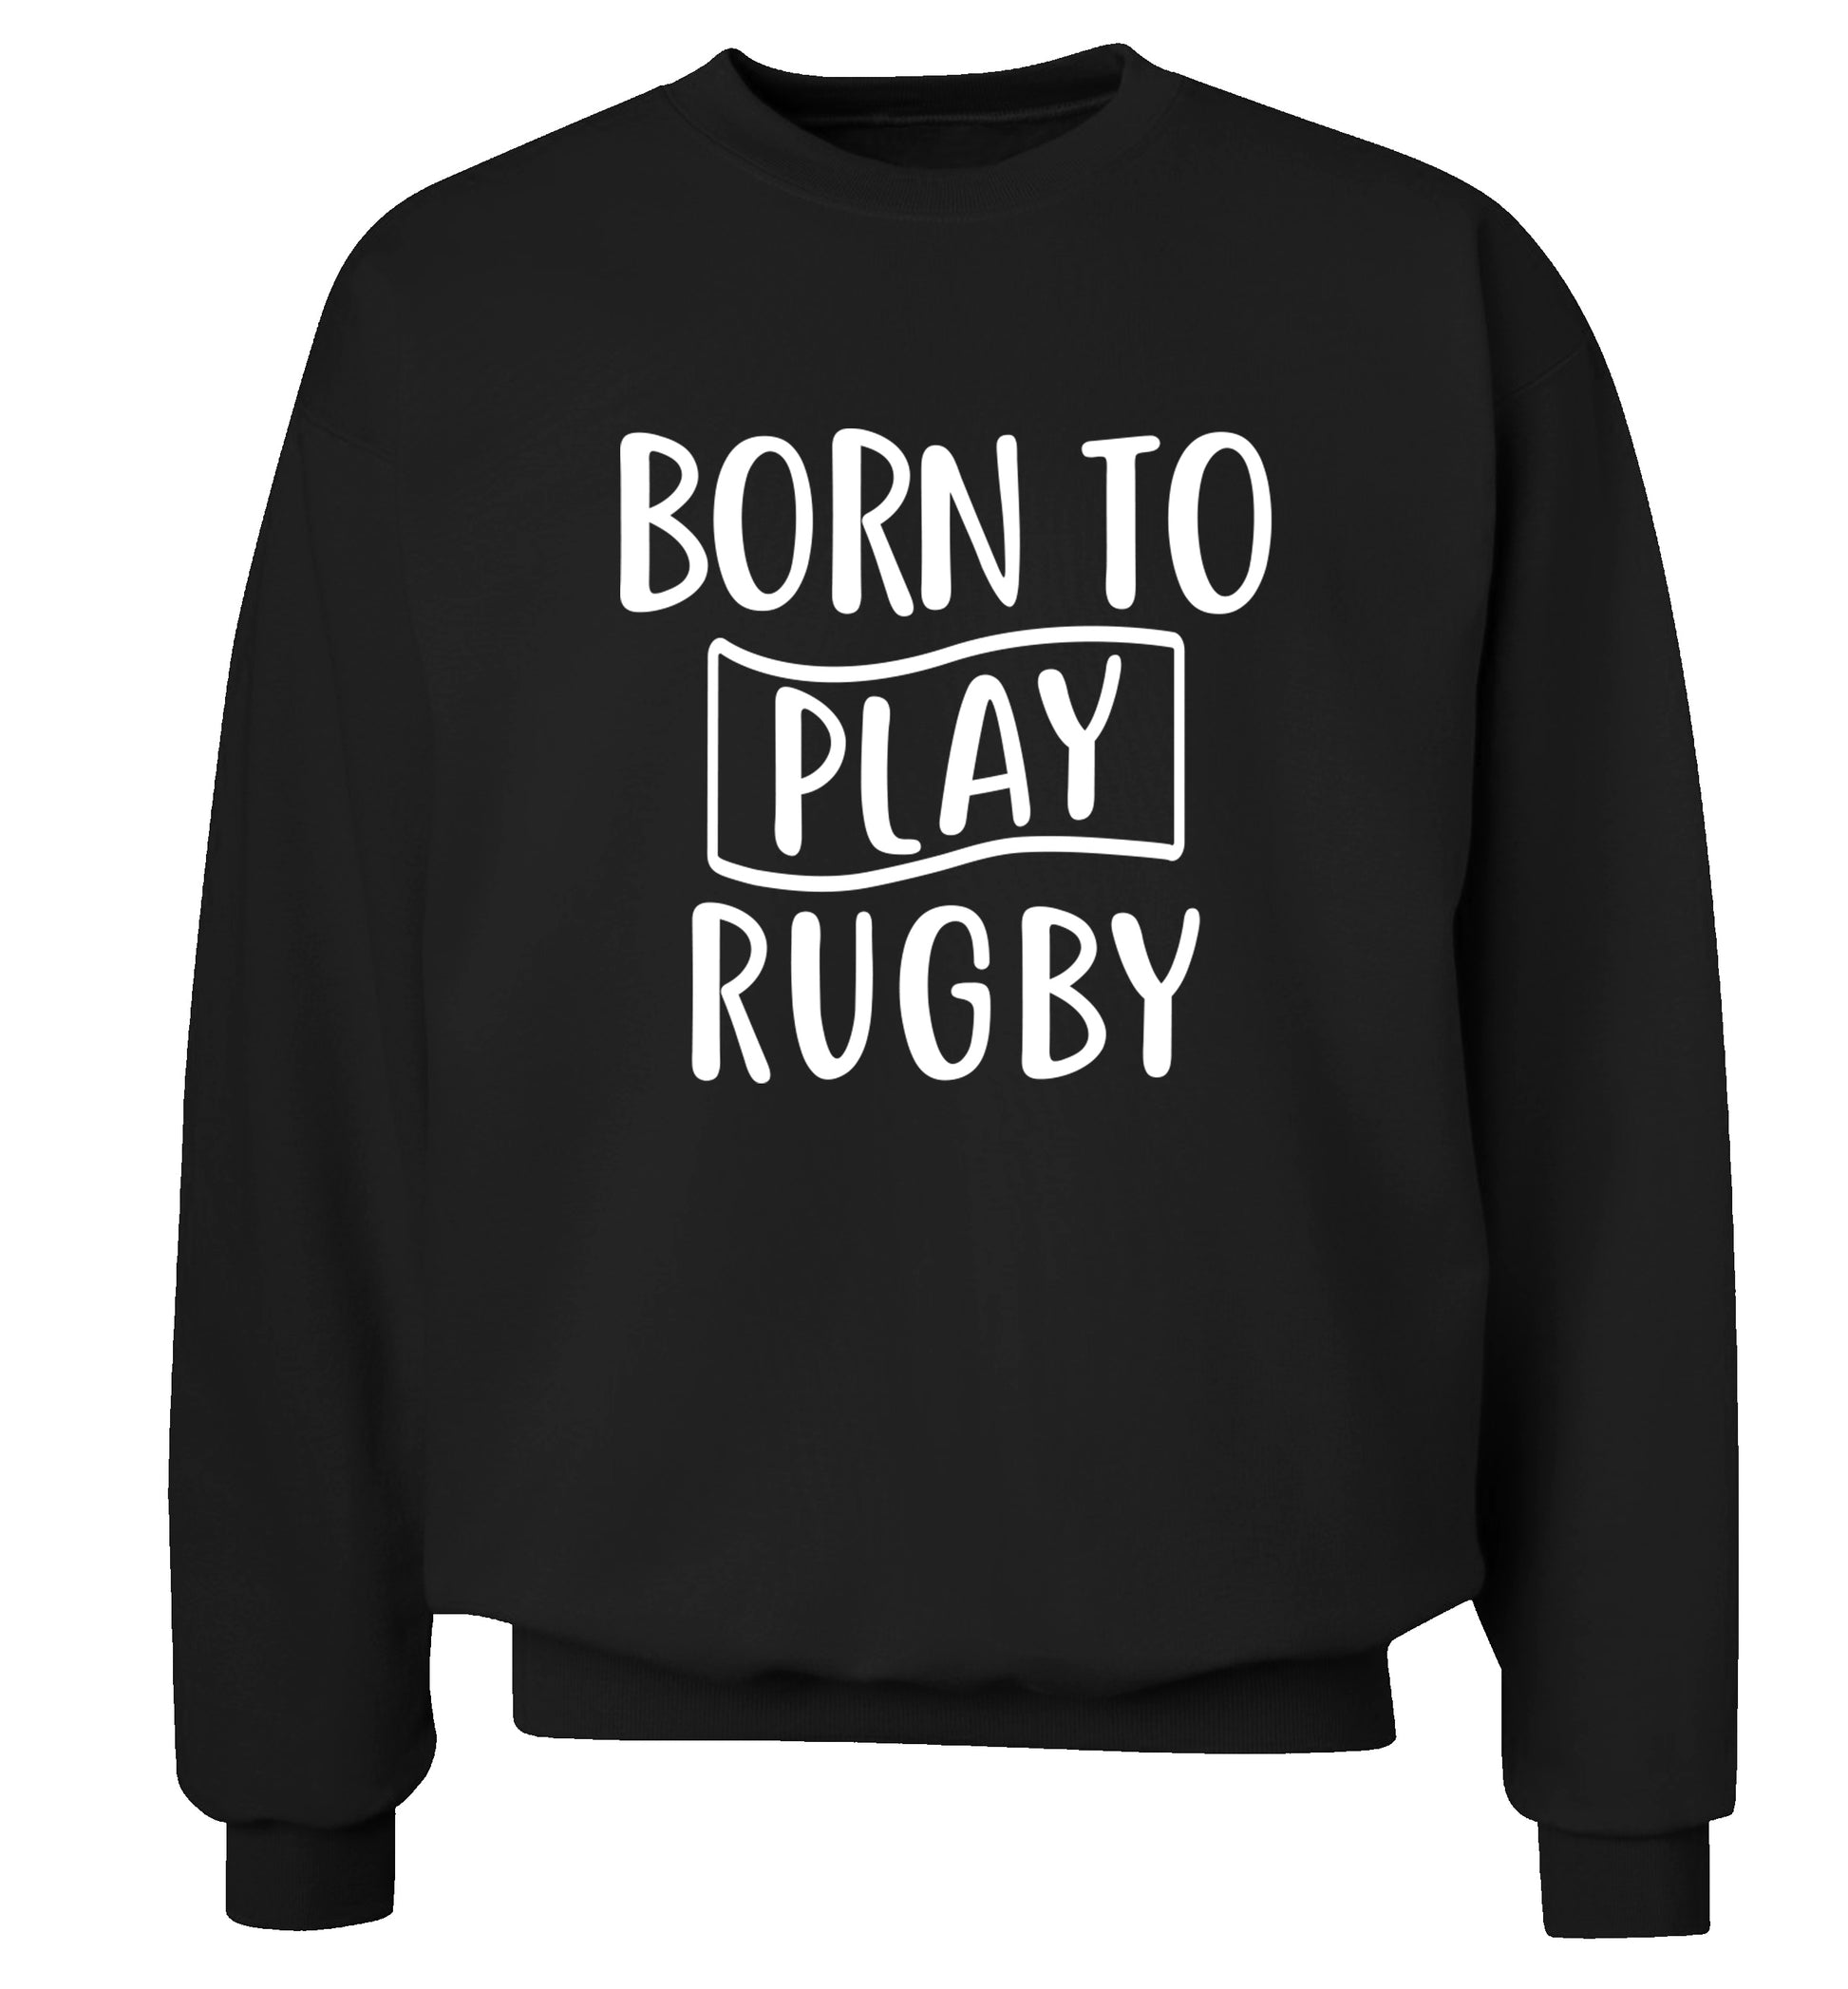 Born to play rugby Adult's unisex black Sweater 2XL